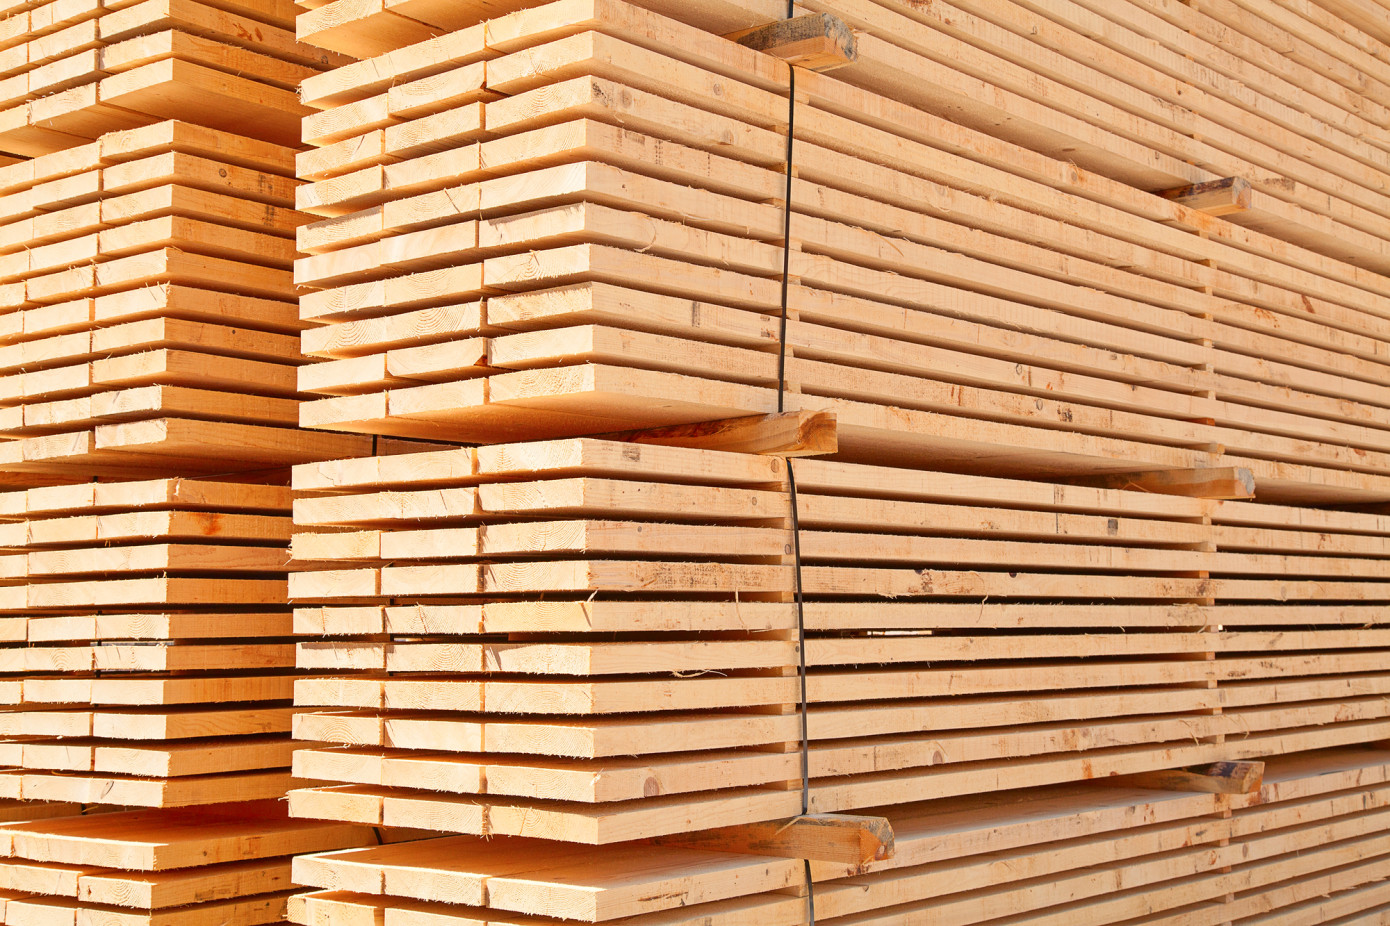 Official of Russian Ministry of Defense was arrested on charges of fraud in purchase of lumber for fortifications